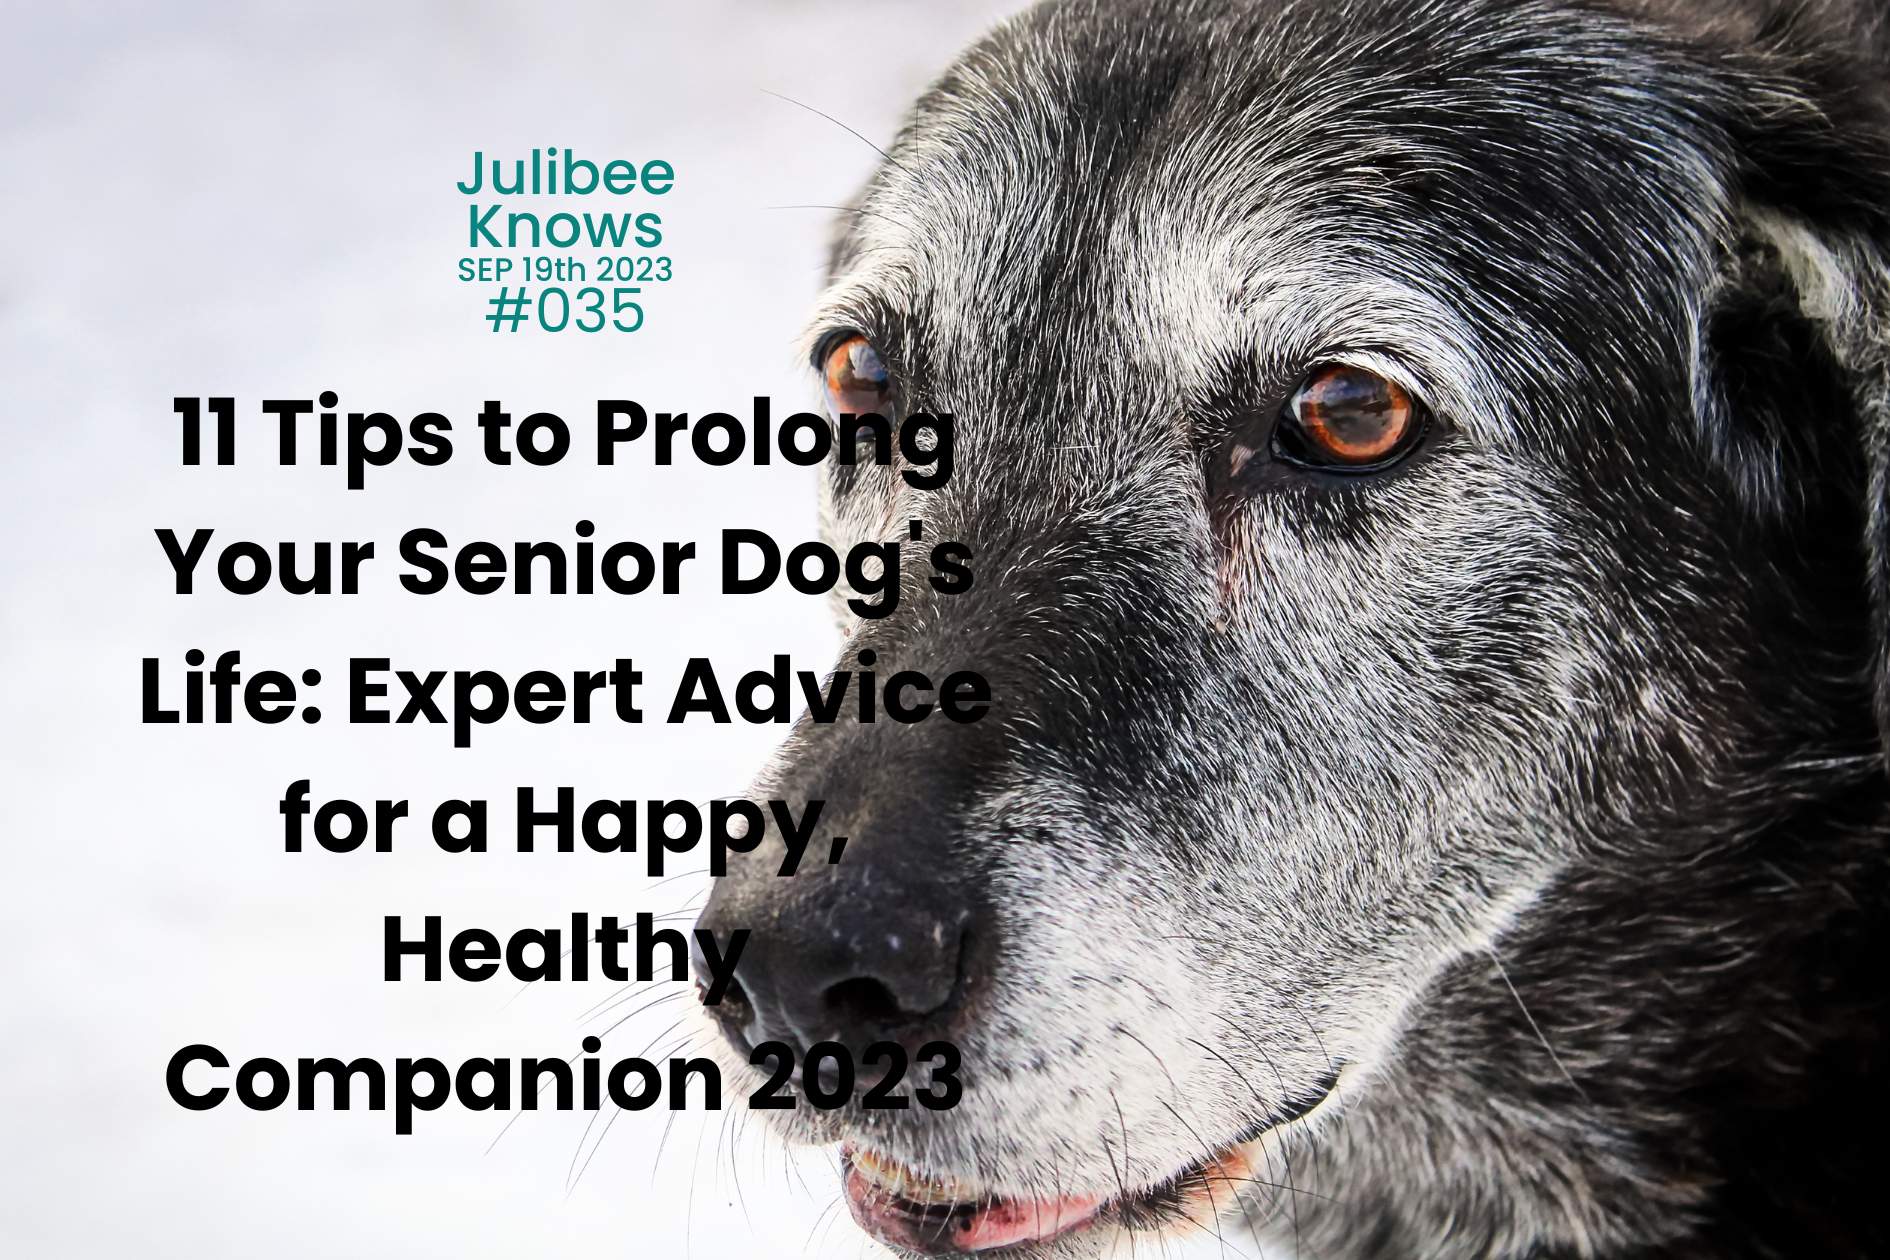 11 Tips to Prolong Your Senior Dog's Life: Expert Advice for a Happy, Healthy Companion